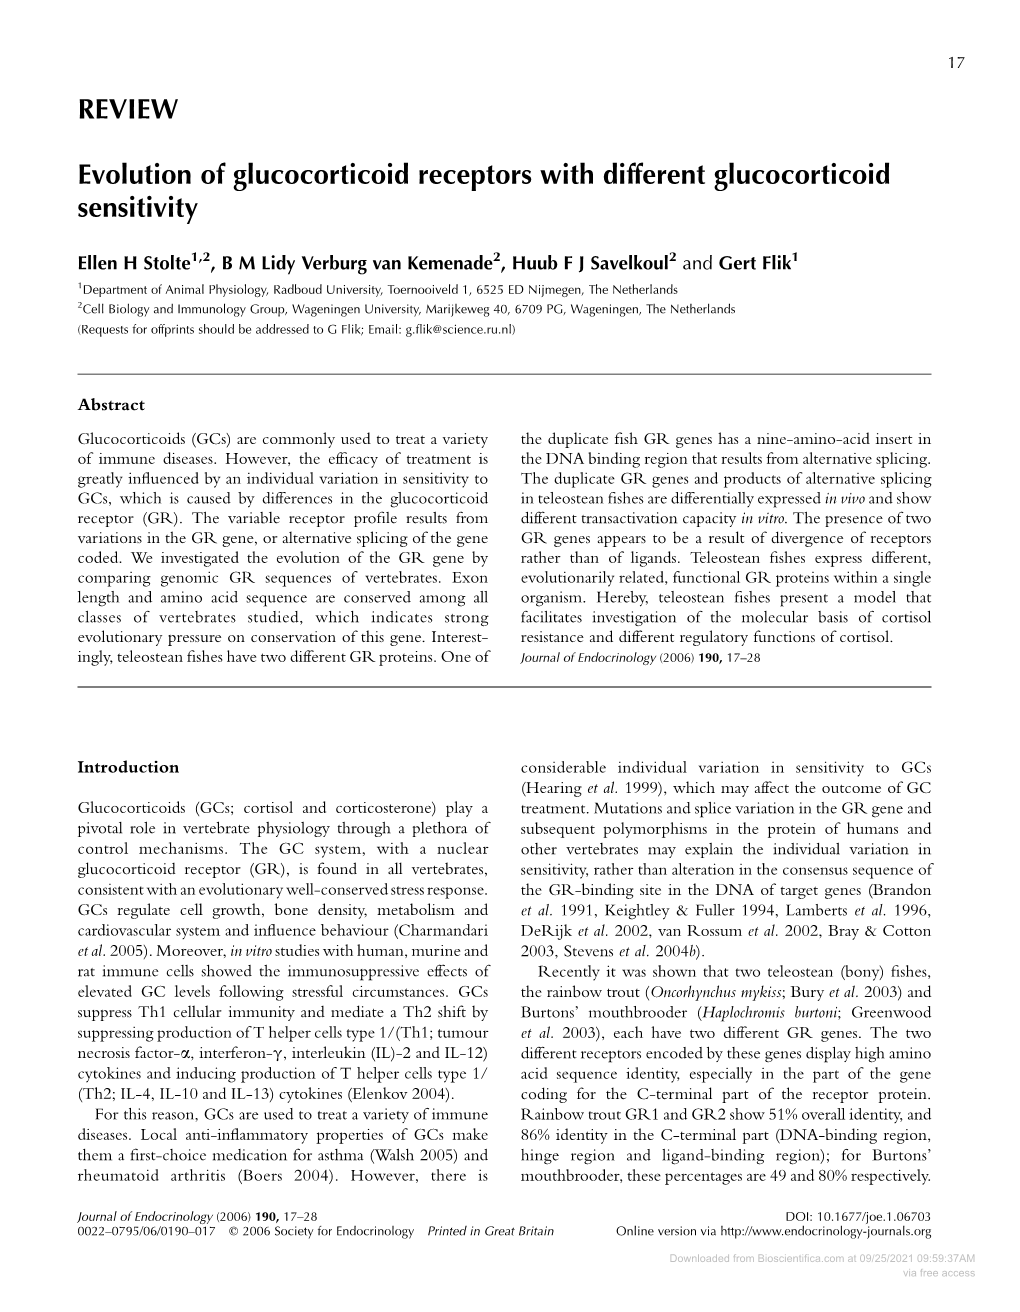 REVIEW Evolution of Glucocorticoid Receptors with Different